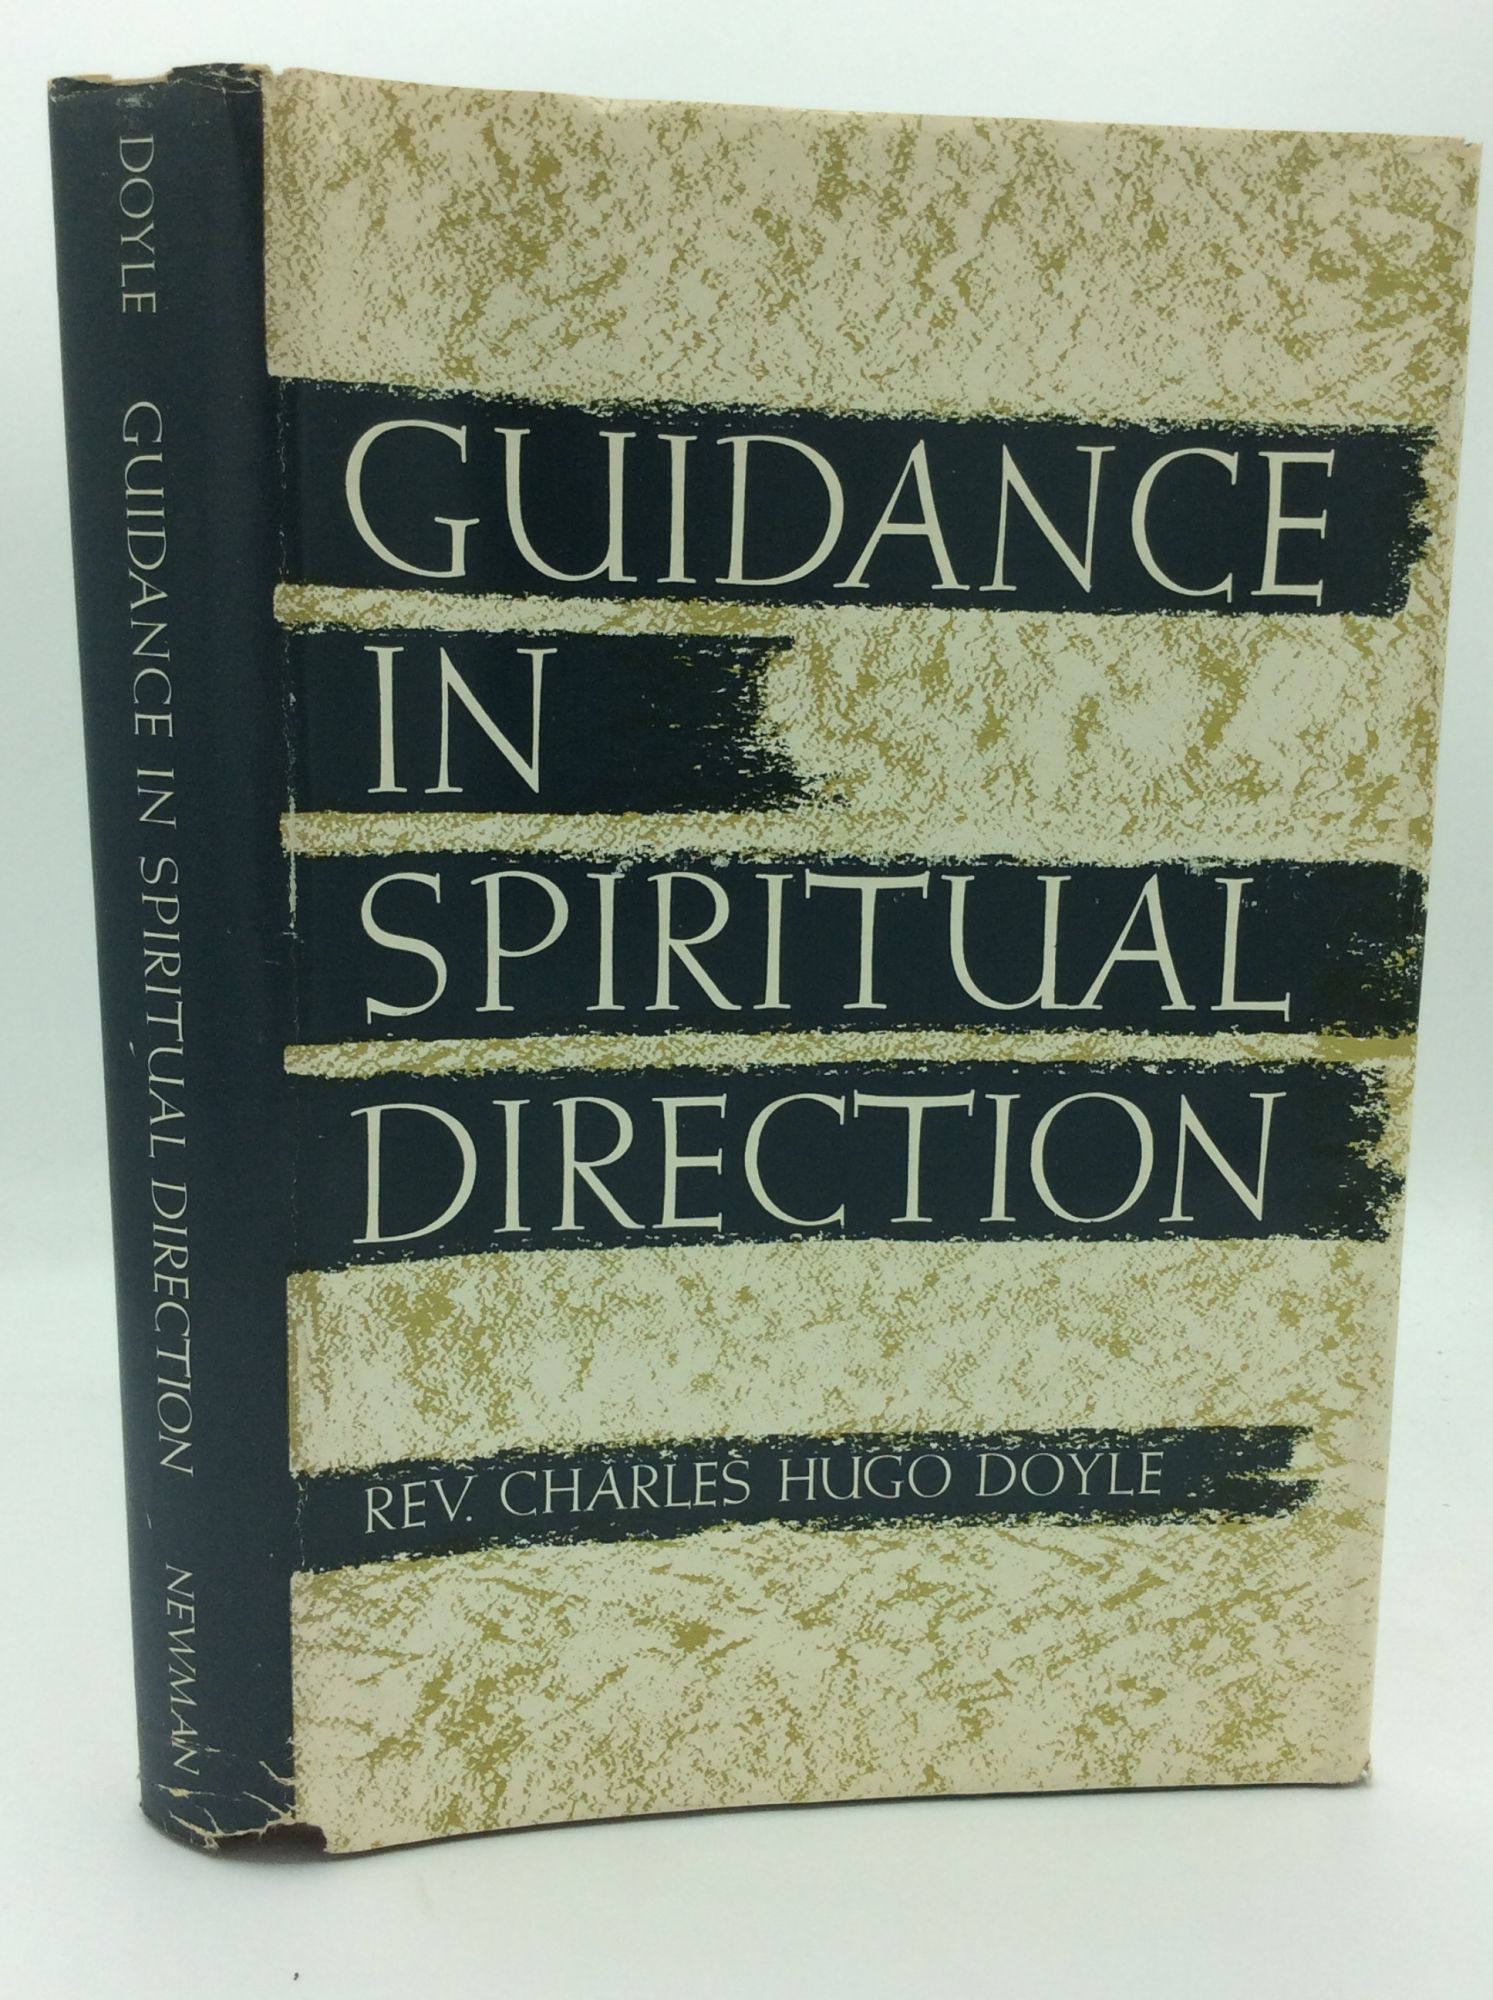 SPIRITUAL　First　First　DIRECTION　Hugo　GUIDANCE　Edition,　Doyle　IN　Charles　Printing